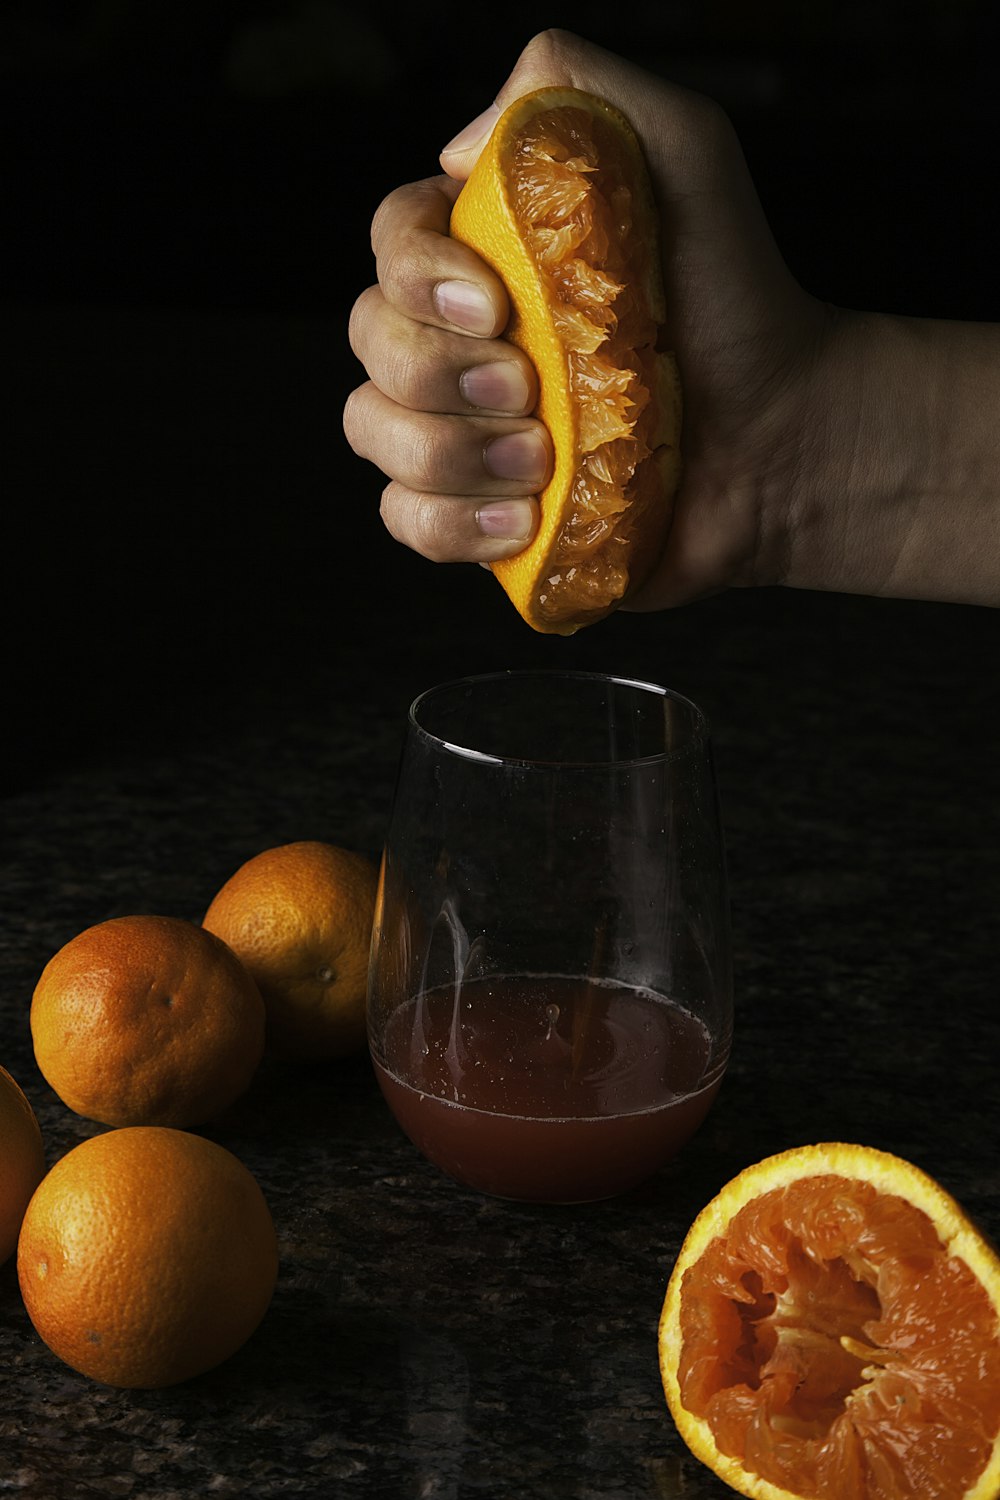 person holding orange fruit beside clear drinking glass with red liquid